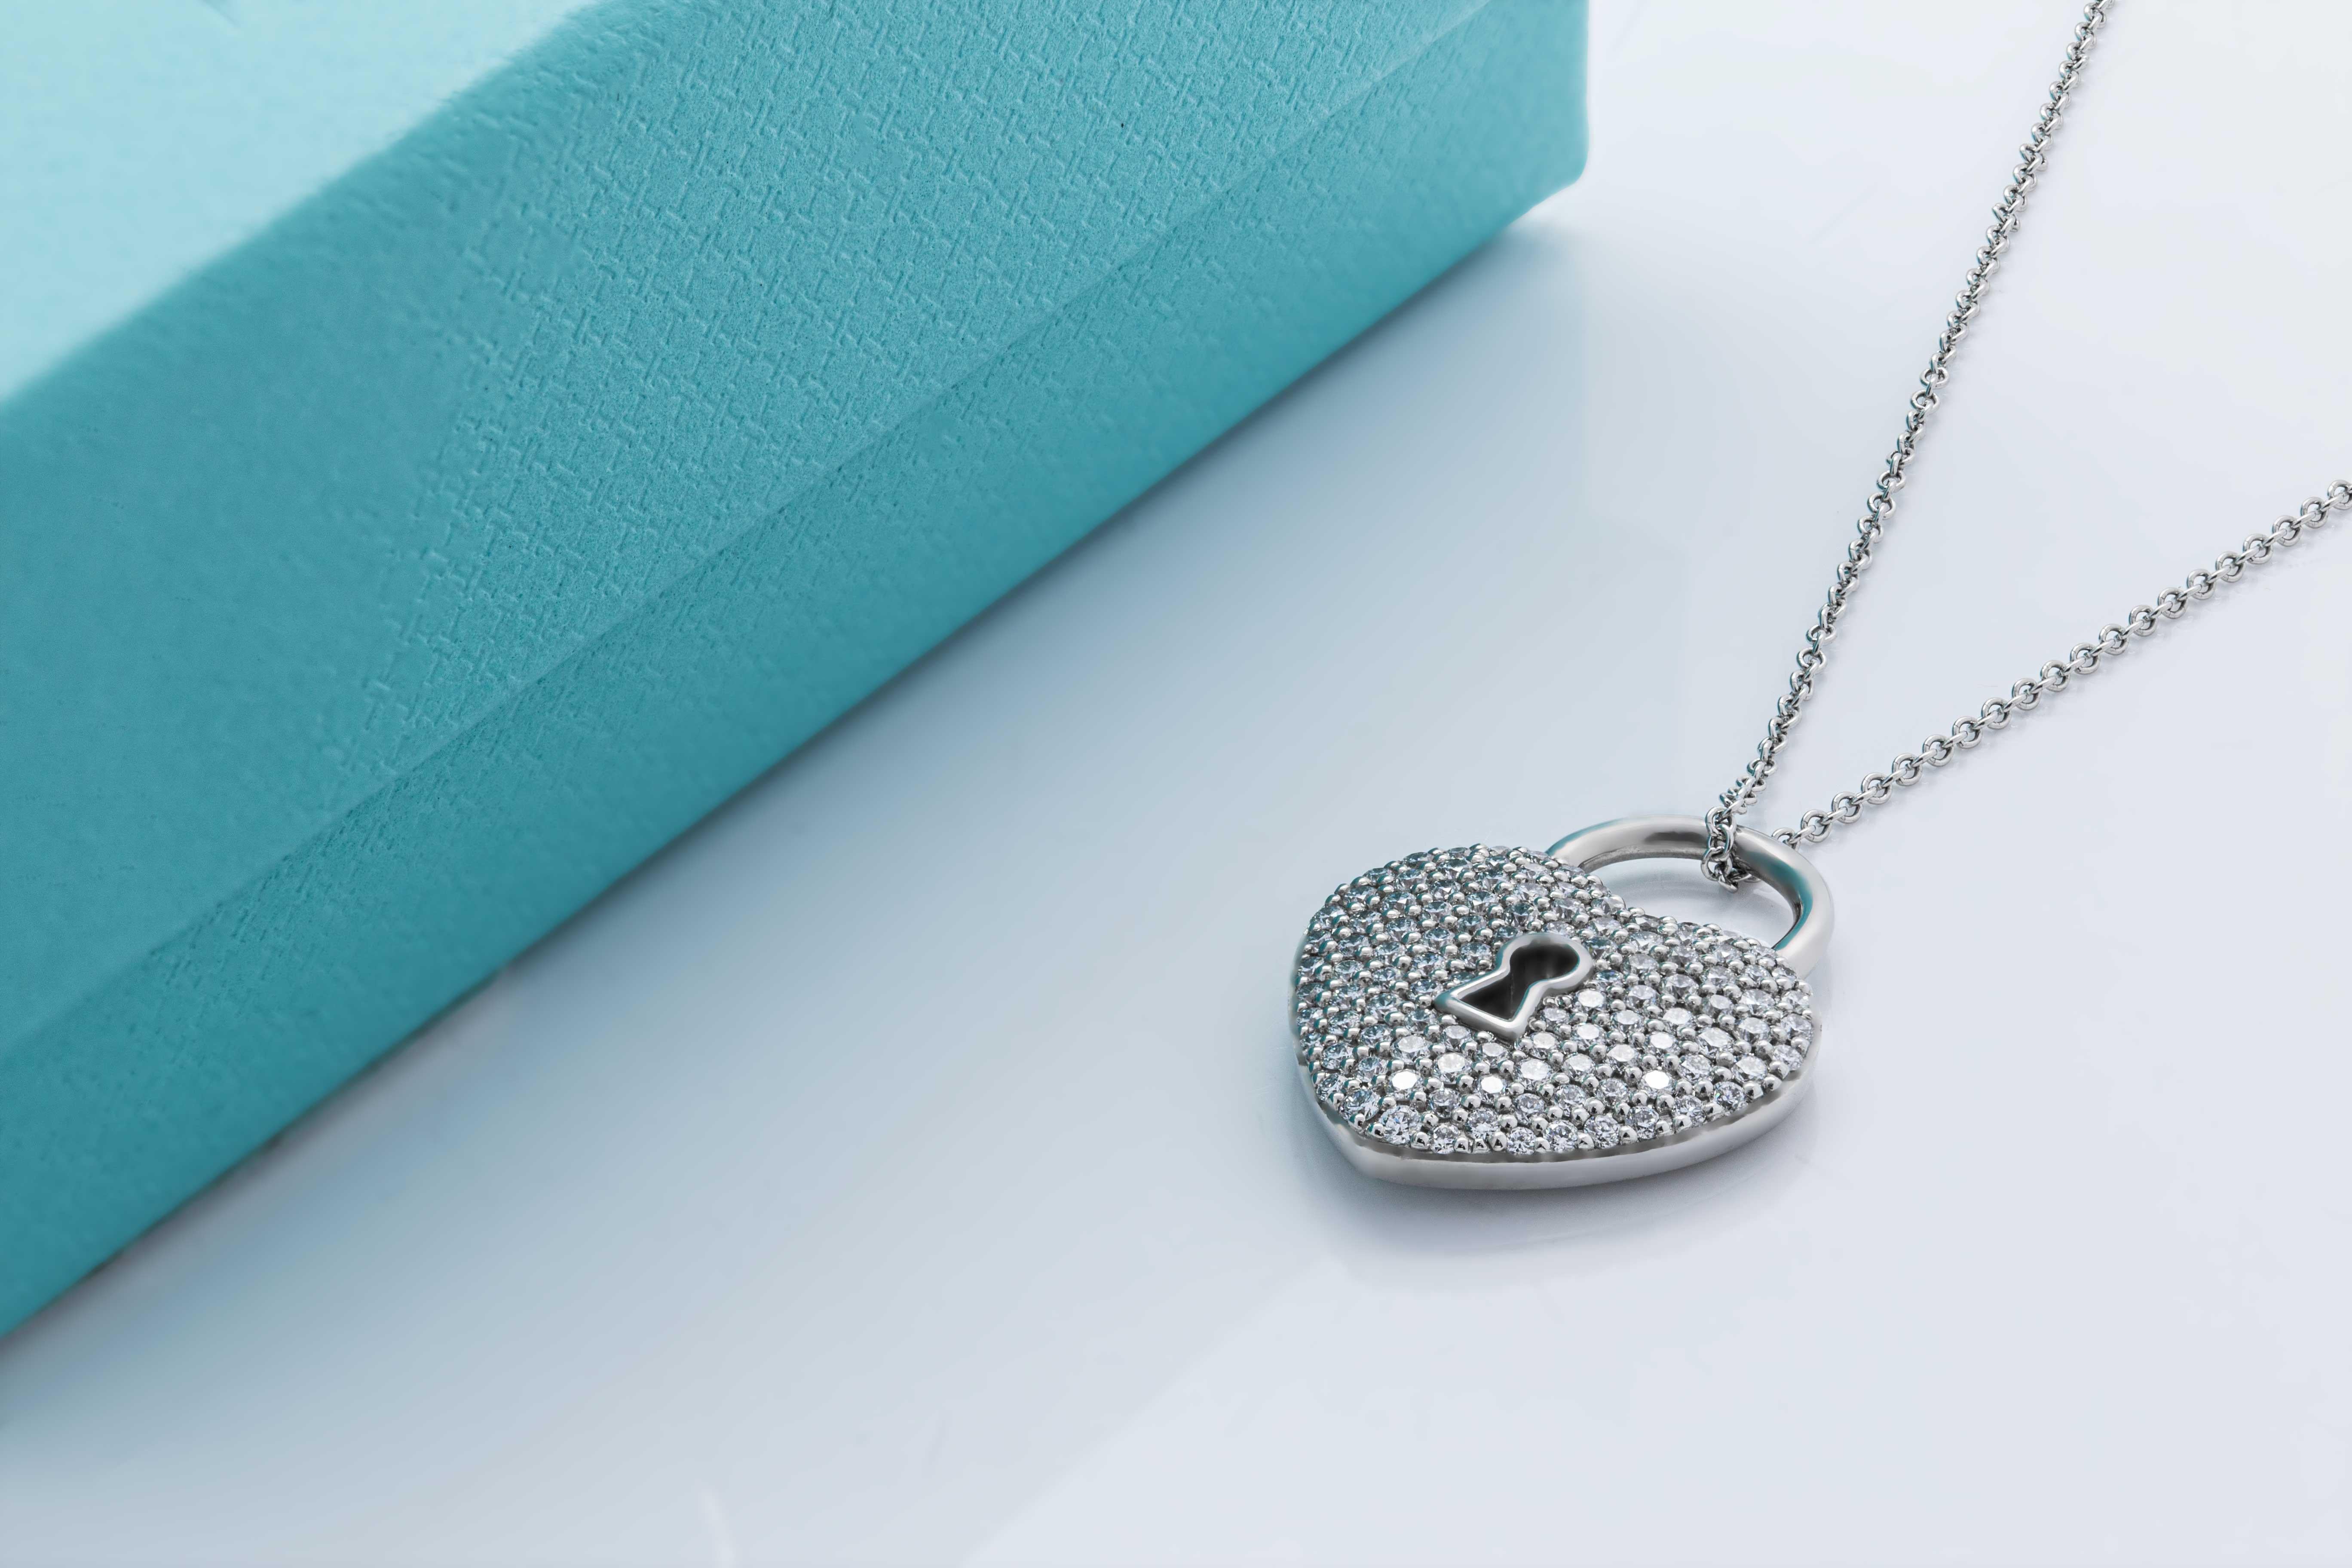 Tiffany & Co. Heart Lock Diamond Paved Platinum Pendant
Authentic Tiffany Piece -  Rare Find!
Total carat weight of diamonds: ~0.75ct (F-G VVS)
Chain length: 17 inch (platinum)
Charm dimensions: 18.05x16mm
Weight: 11gr
Comes in original box w/